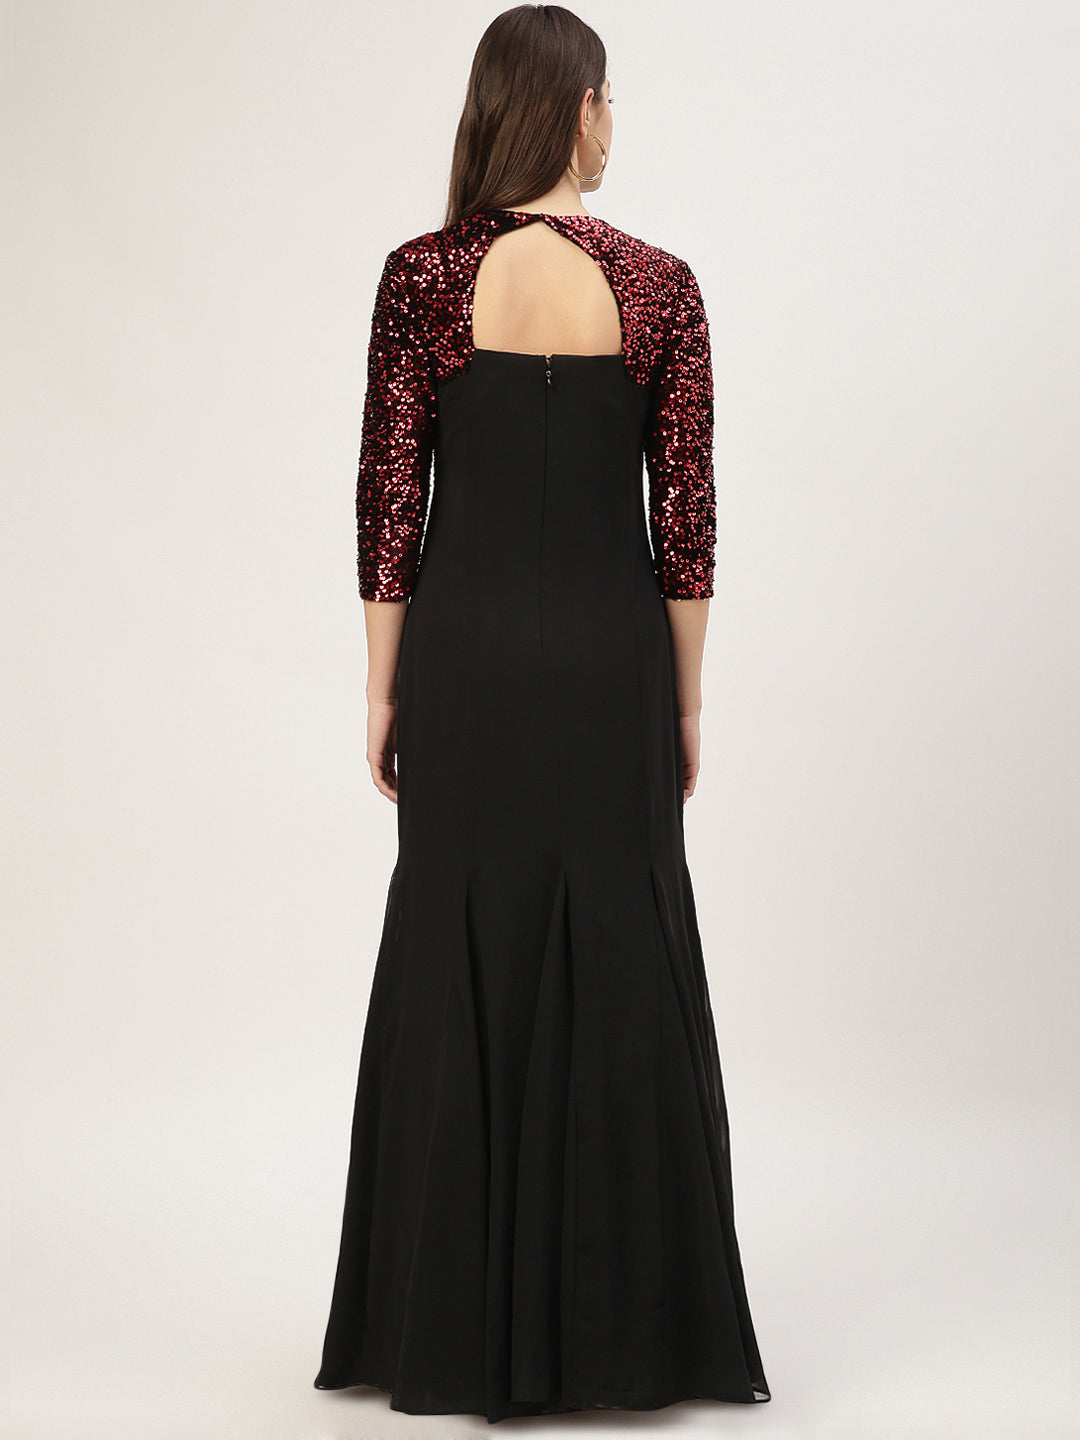 Red & Black Embellished Gown with 3/4 Sleeves